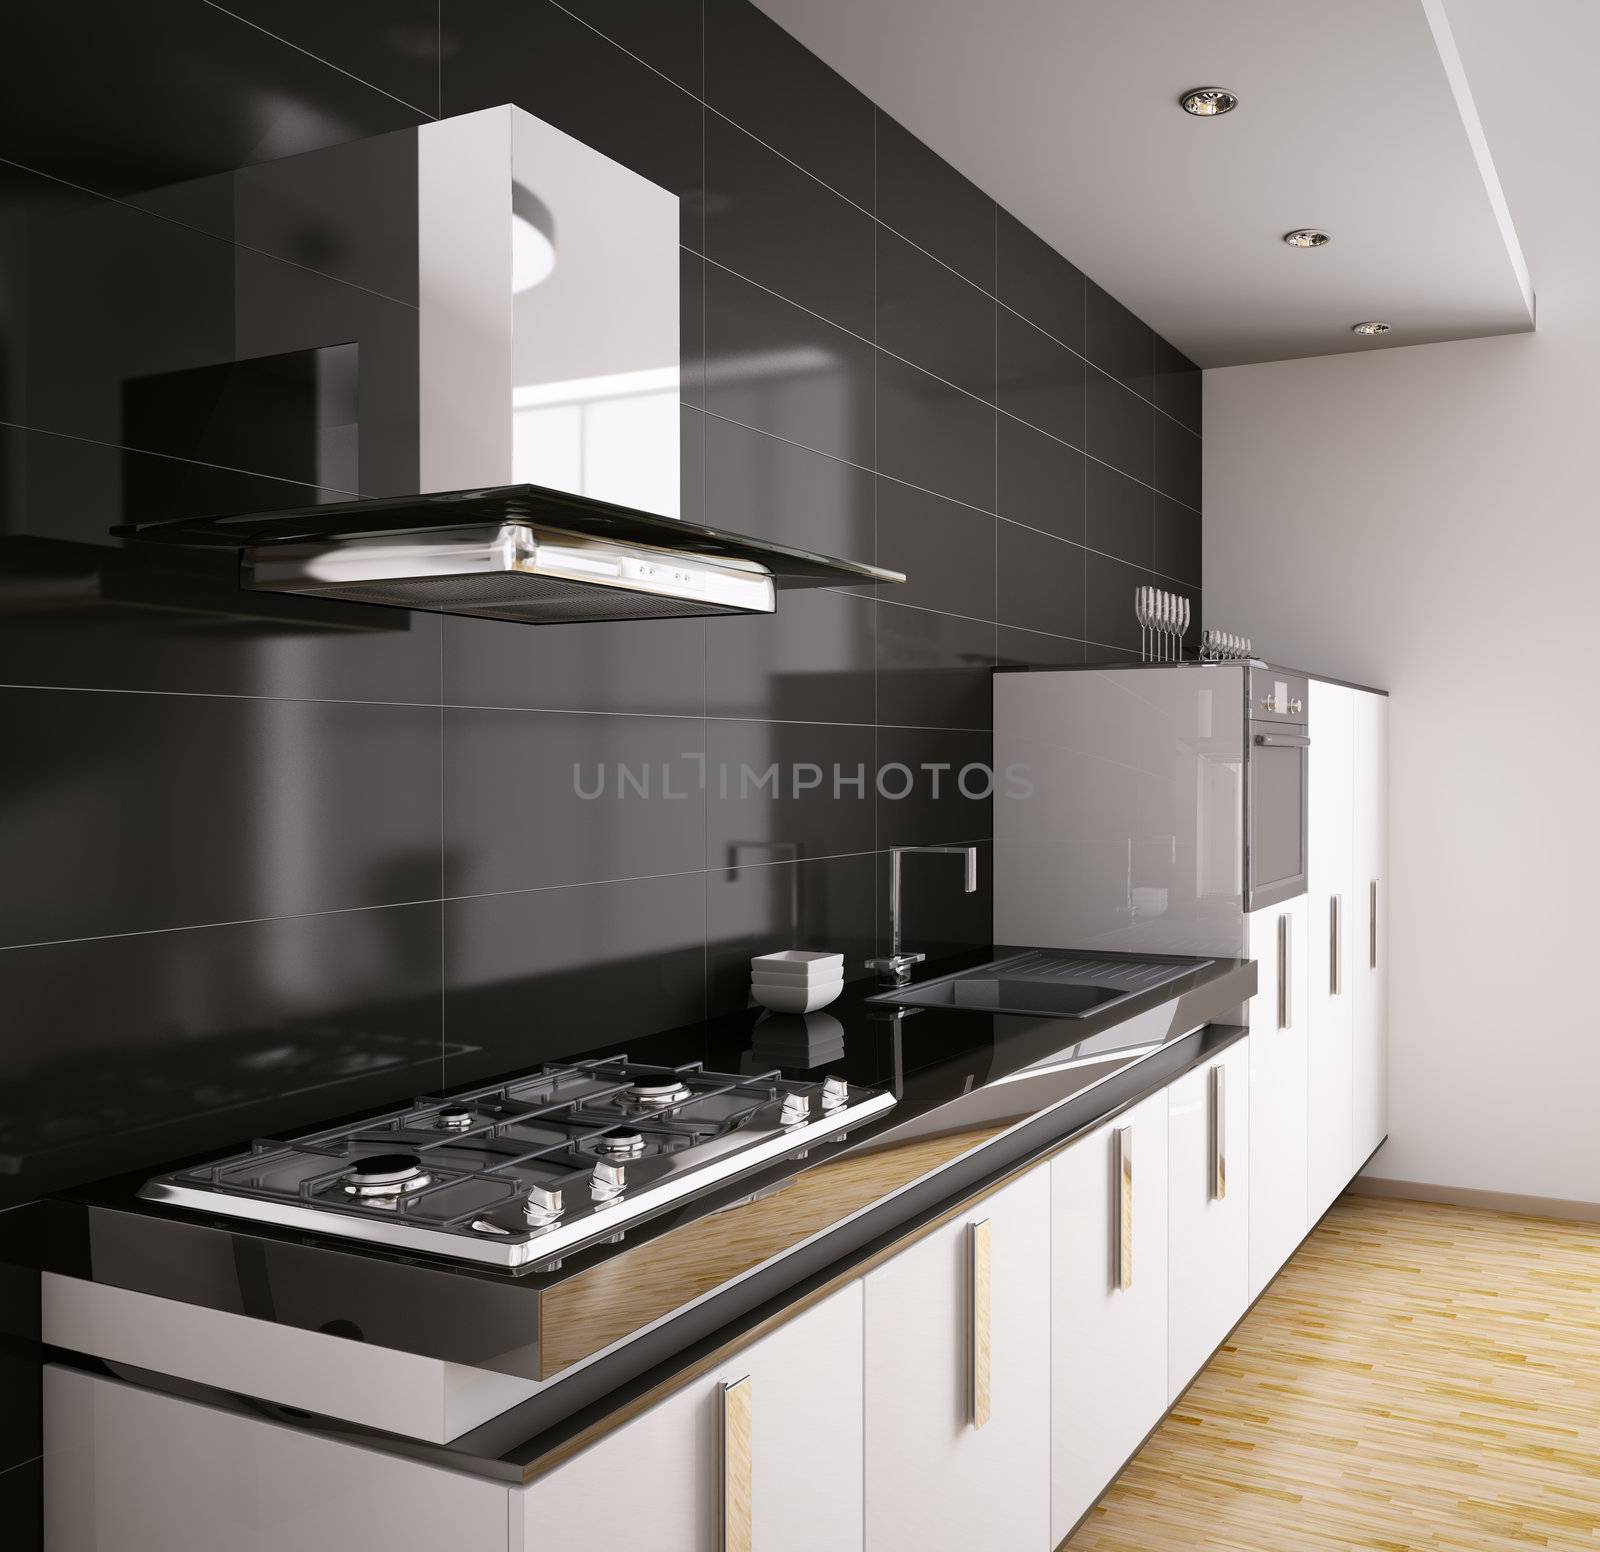 Modern kitchen with sink, gas cooktop and hood interior 3d